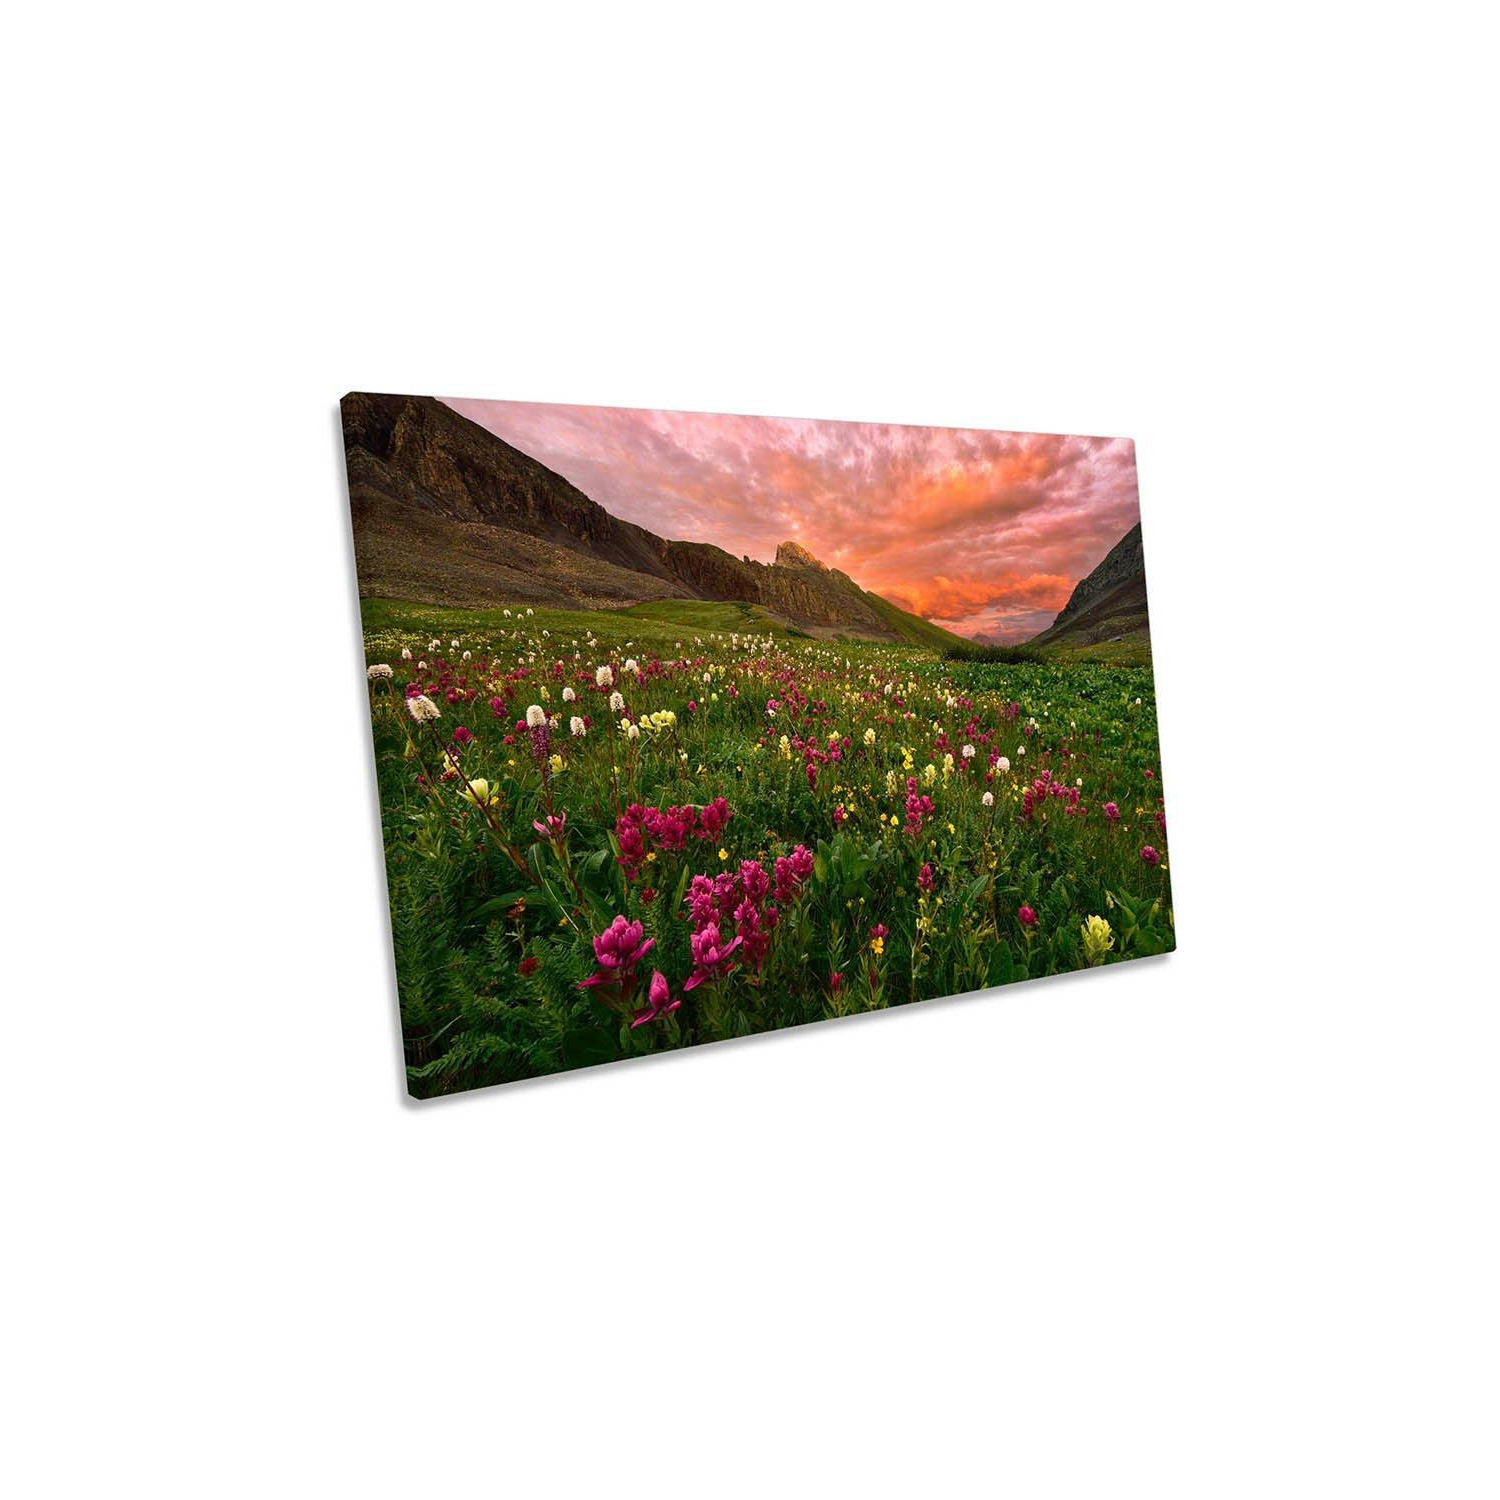 Carpet of Wildflowers Mountain Sunset Canvas Wall Art Picture Print - image 1